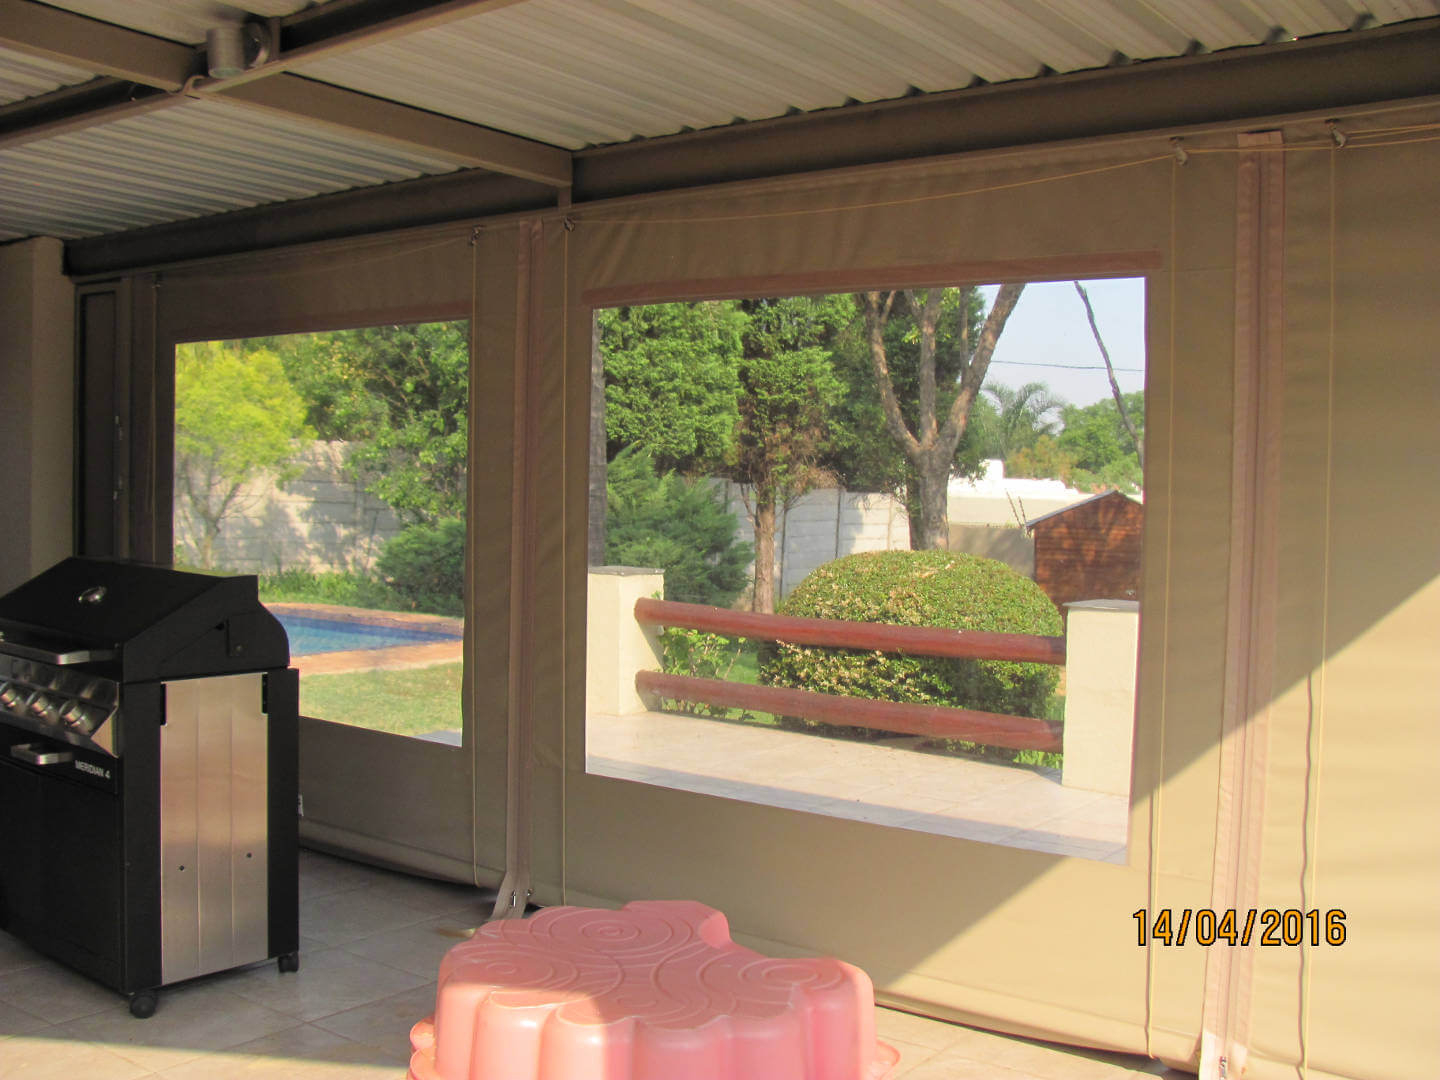 Duramaster Outdoor Duramaster Outdoor Blinds intended for sizing 1440 X 1080